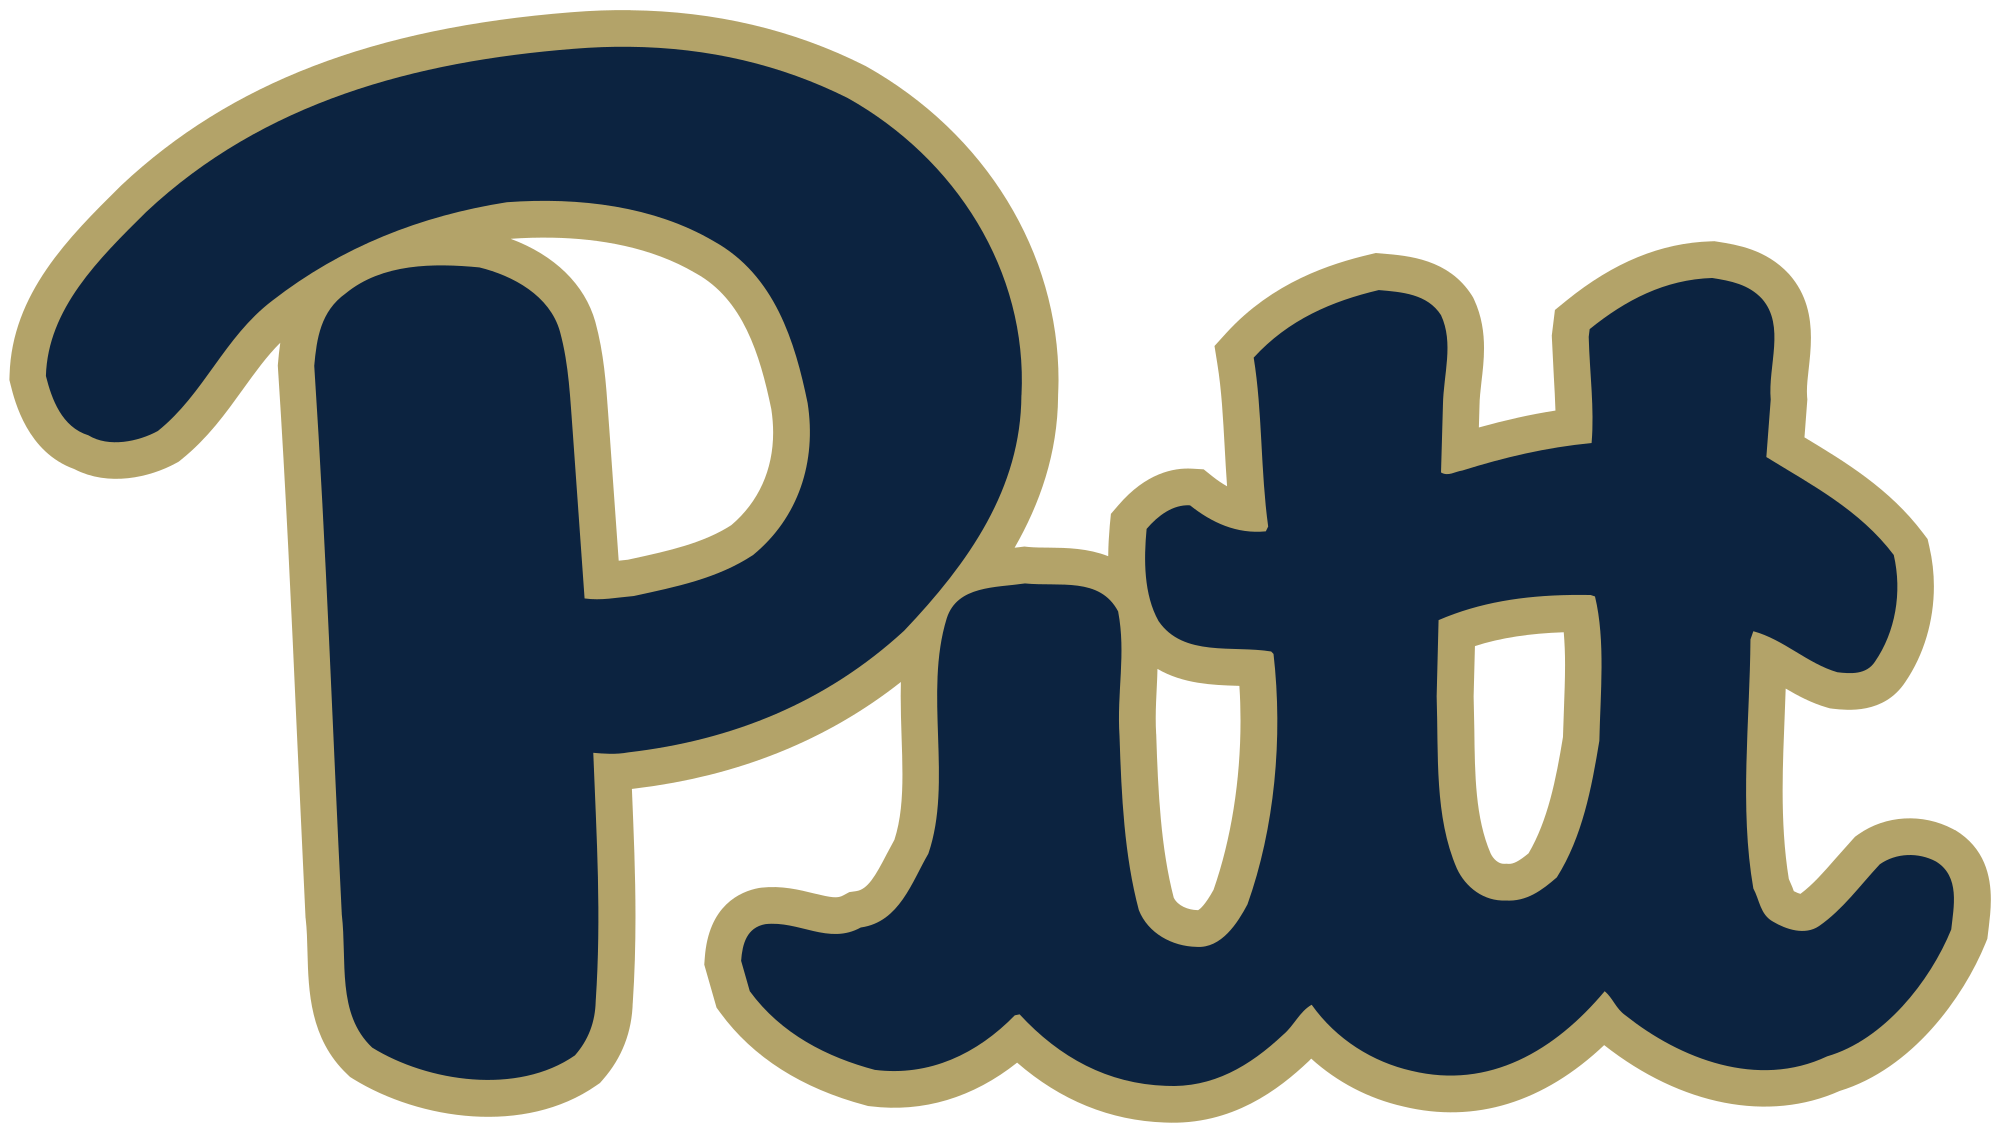 Panther College Logo - Pittsburgh Panthers